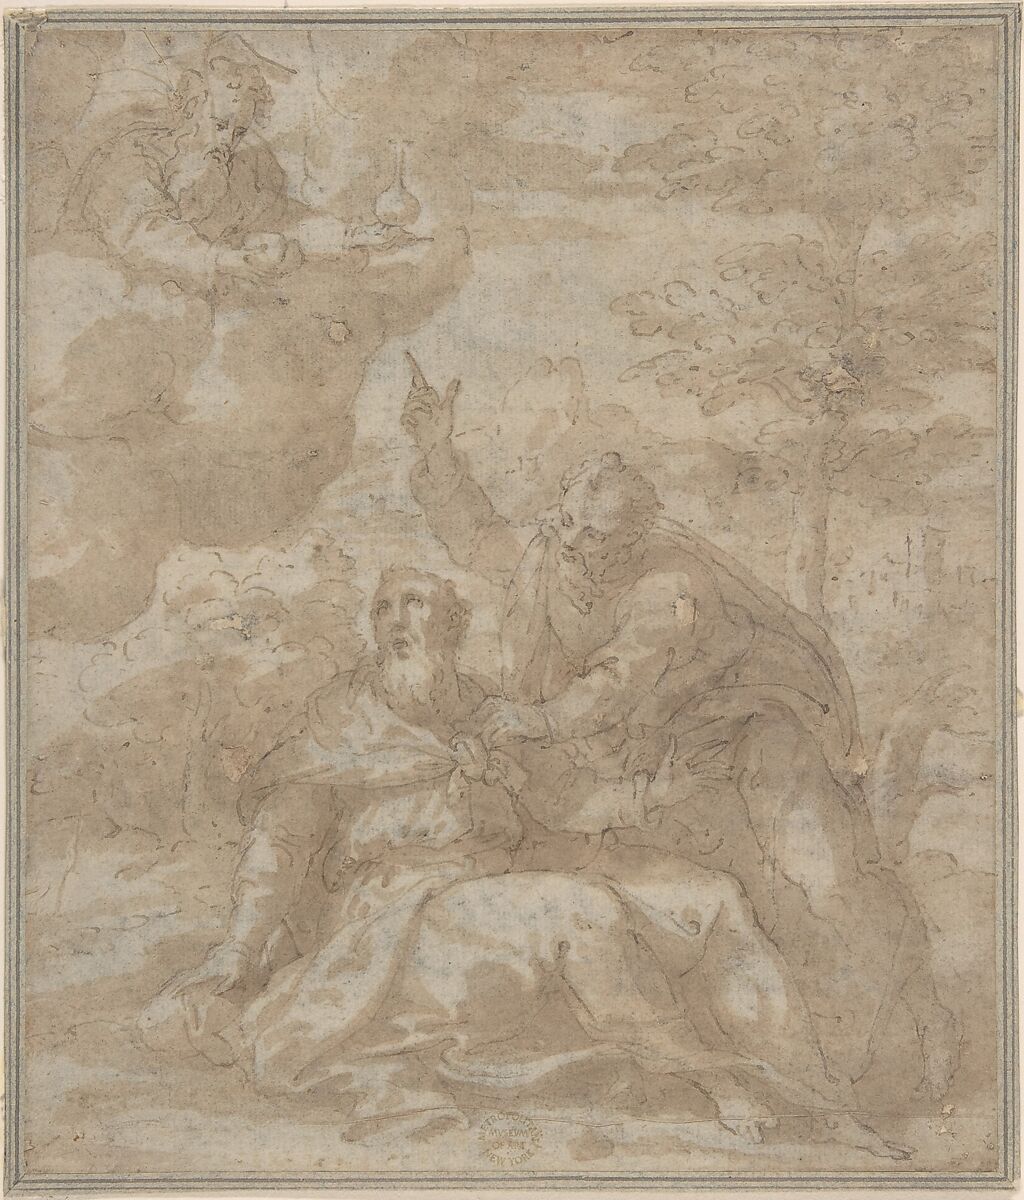 Death of a Saint, Anonymous, Italian, Roman-Bolognese, 17th century, Pen and brown ink, brush and brown wash over charcoal on light tan paper 